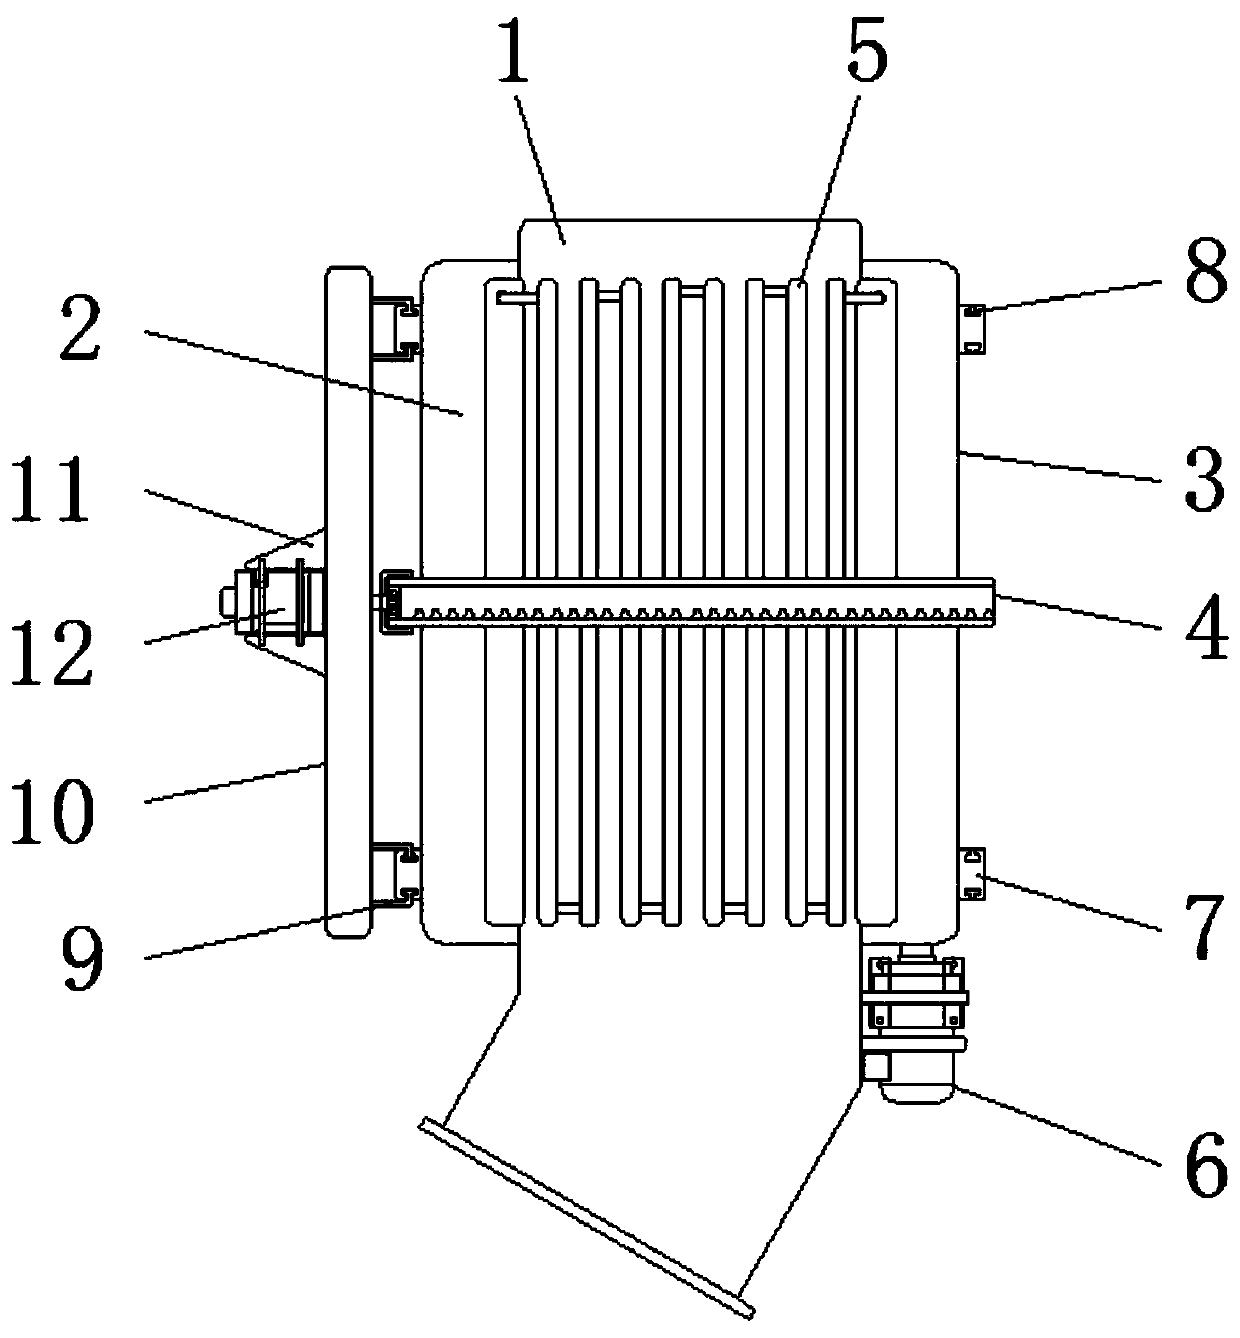 A feeding nozzle with constant cooling function